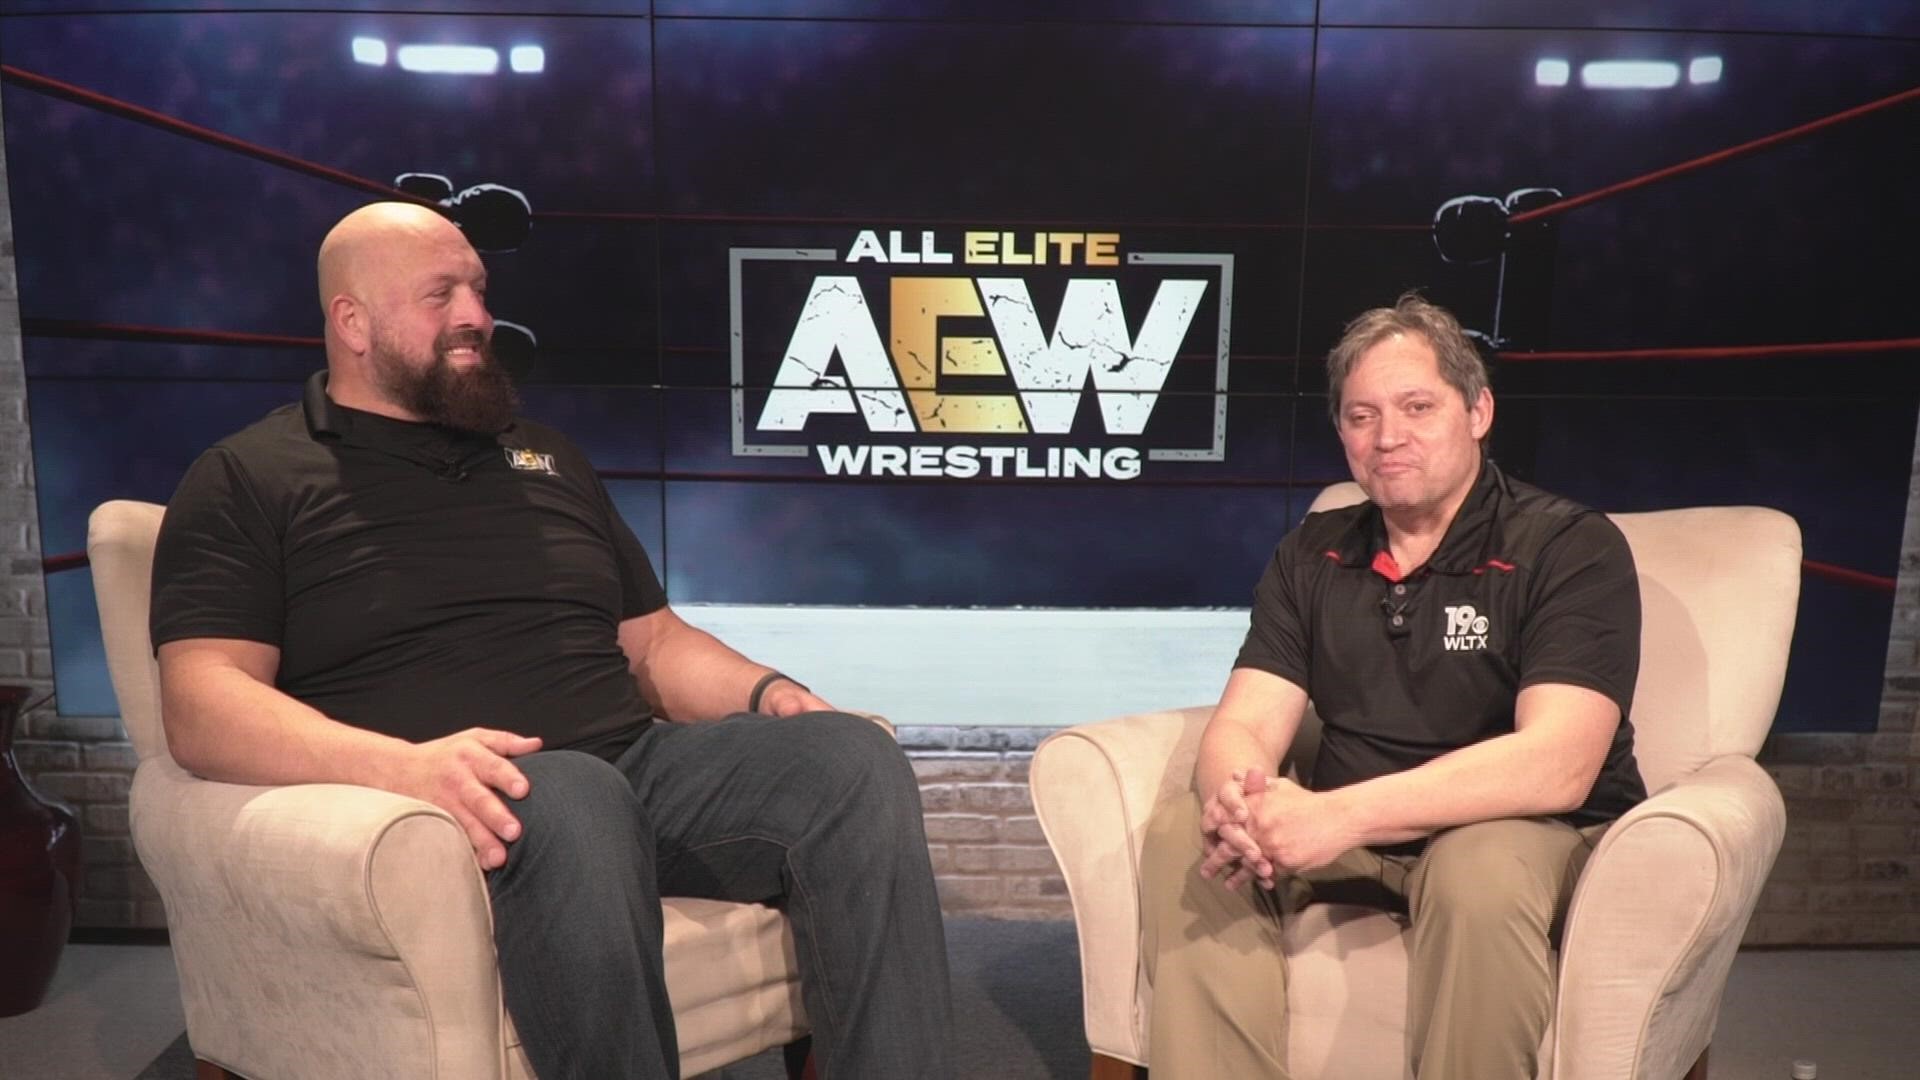 All Elite Wrestling comes to the Colonial Life Arena Wednesday night where it will bring its own version of March Madness.